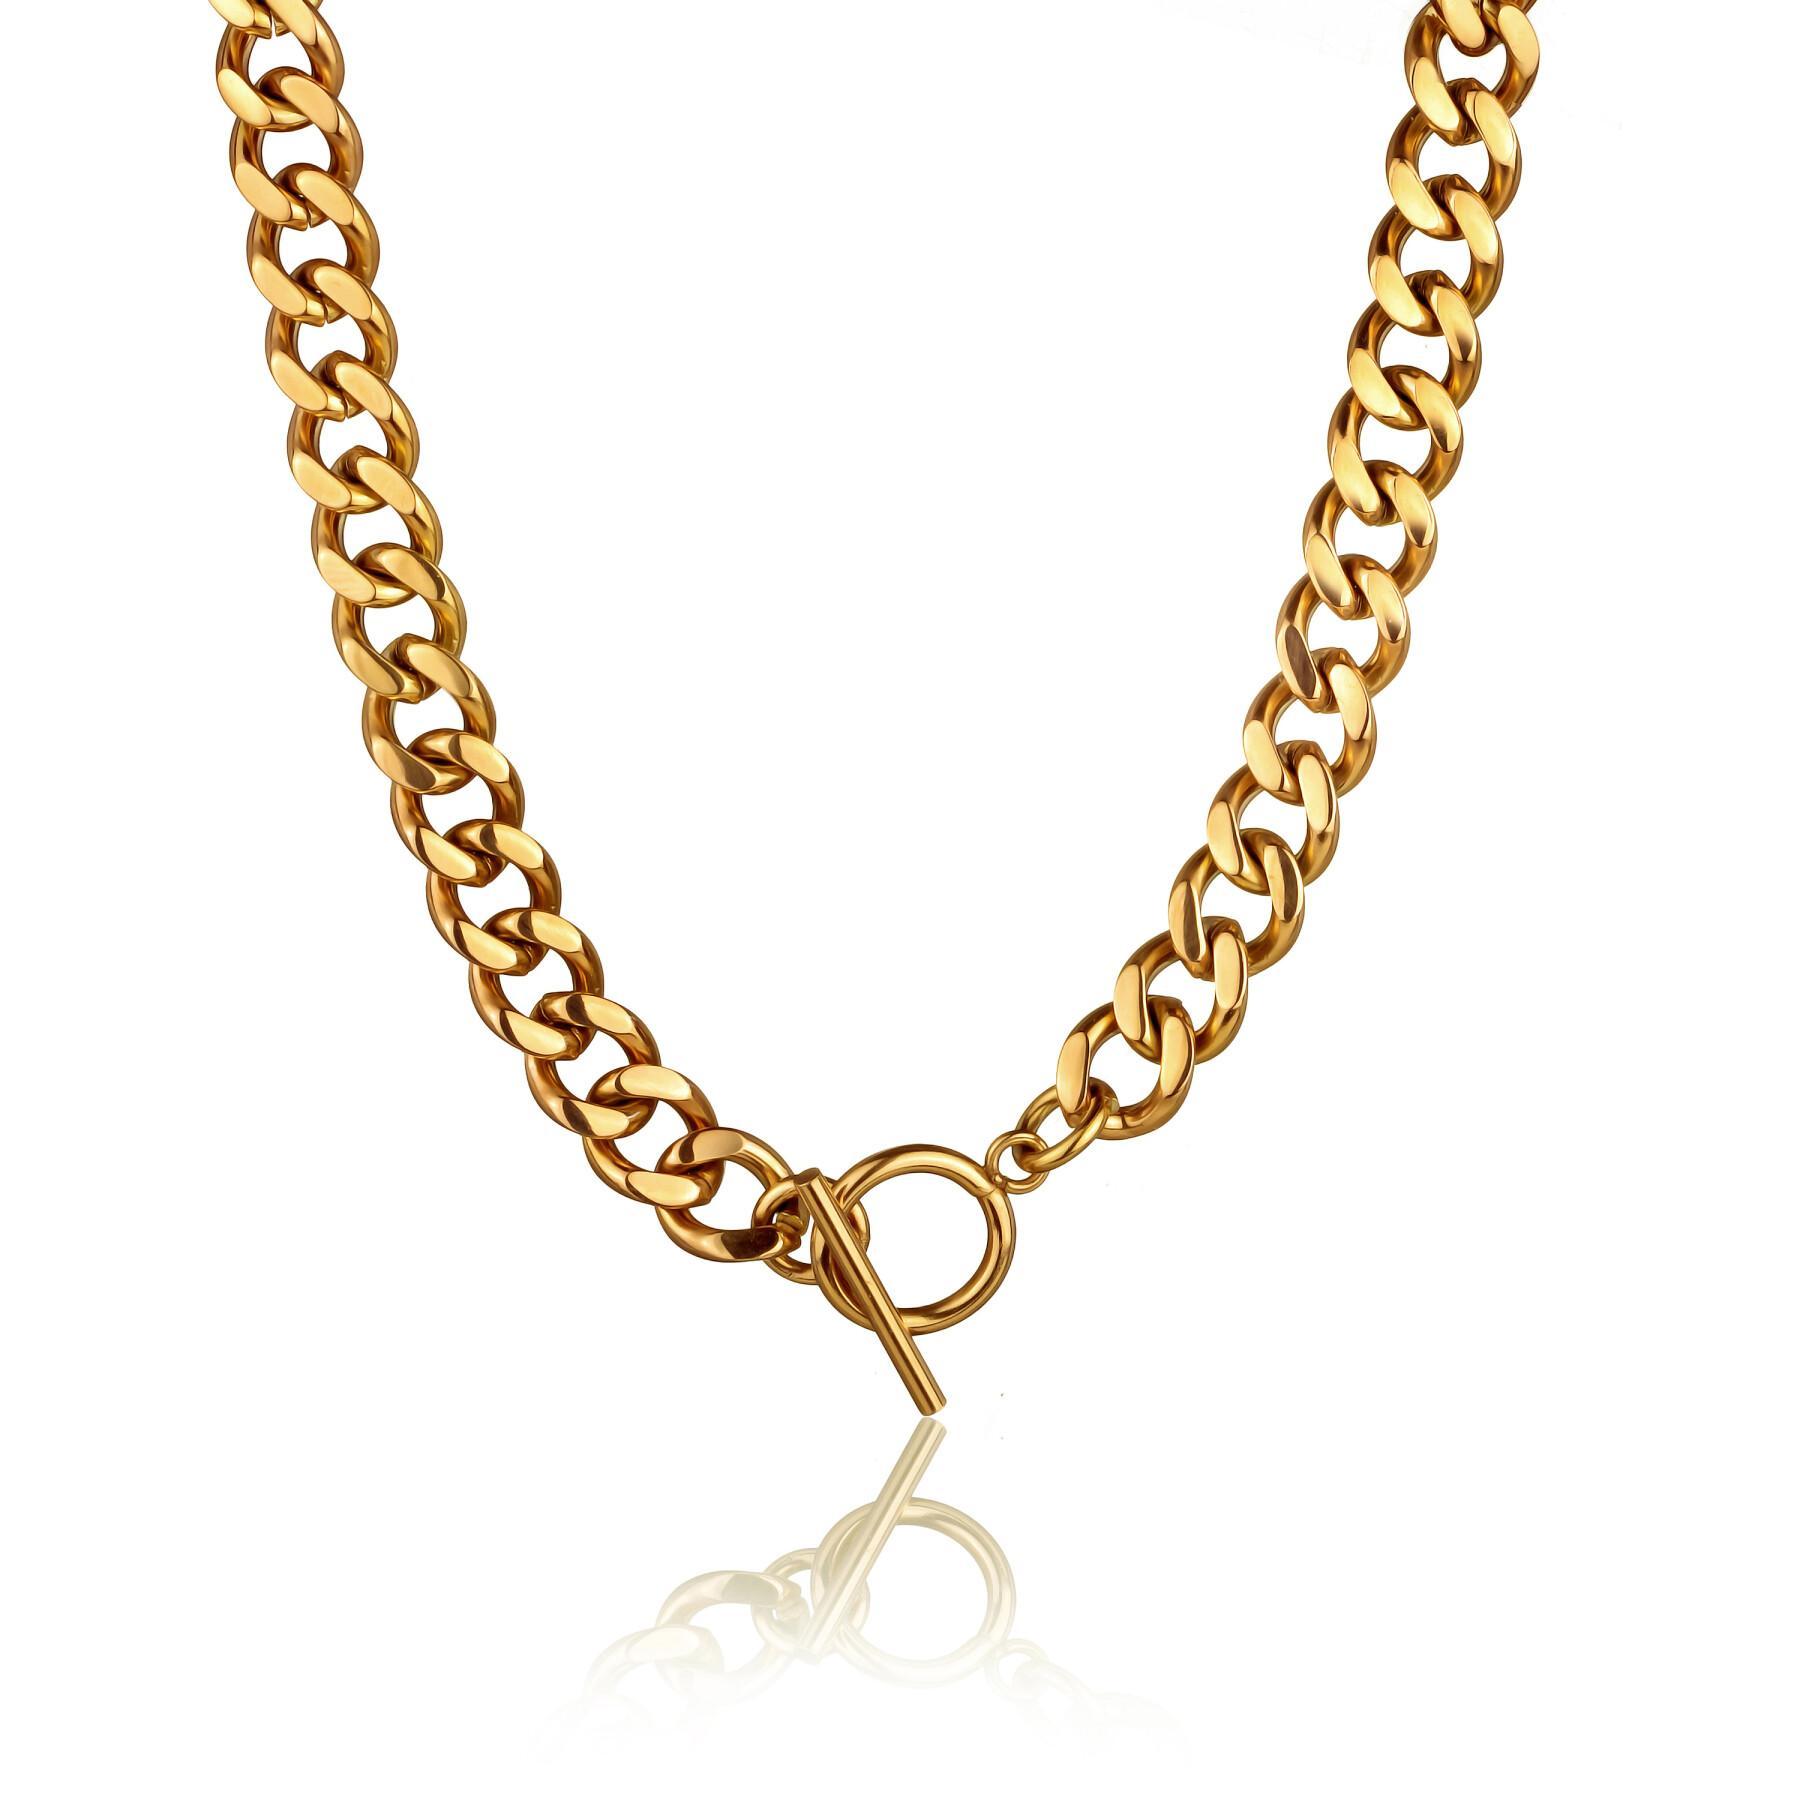 Women's necklace Isabella Ford Jules